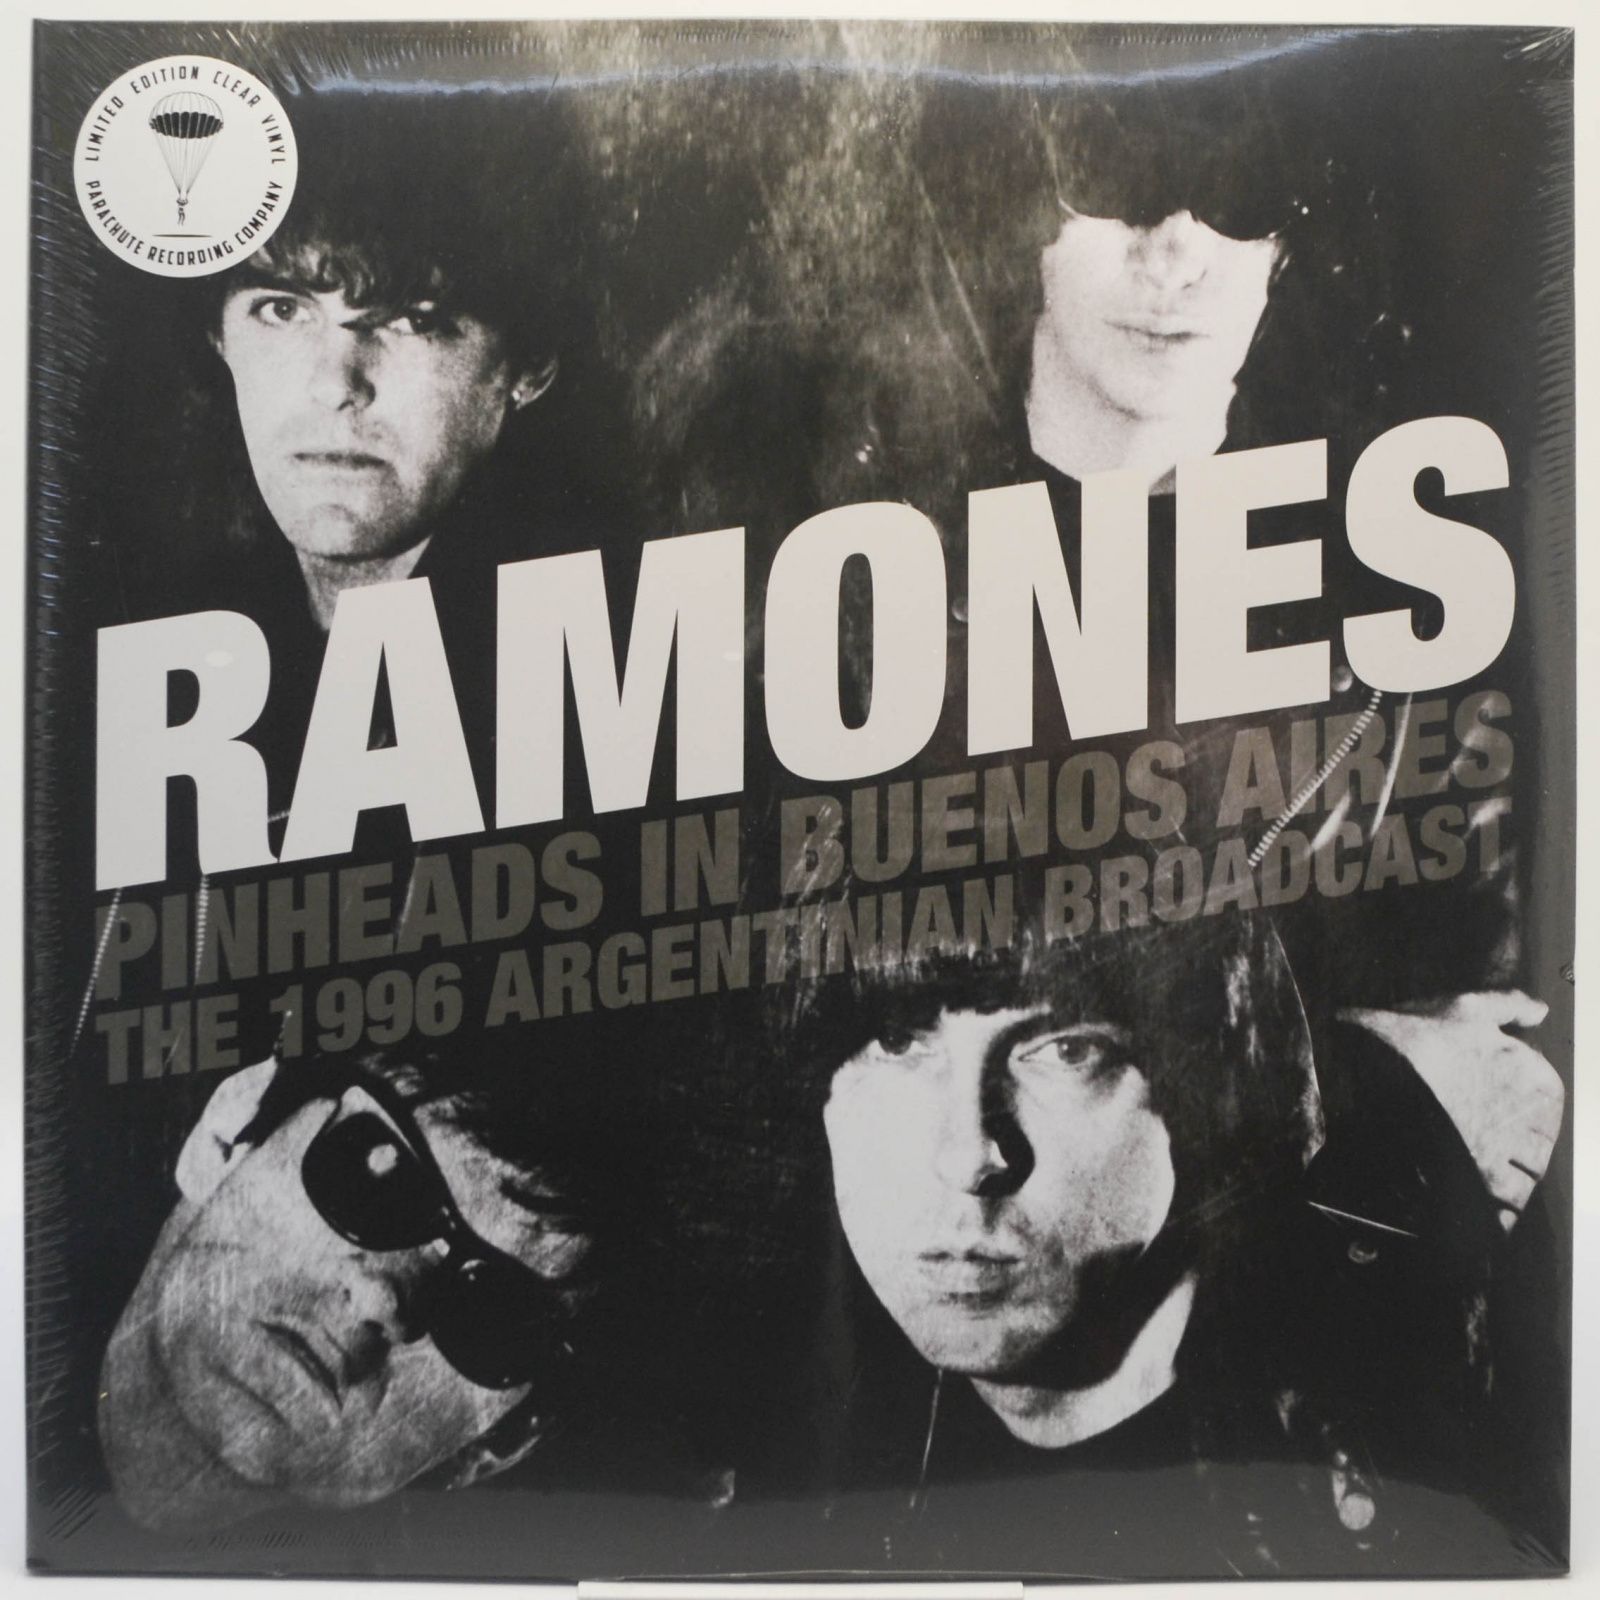 Ramones — Pinheads In Buenos Aires (2LP), 2016